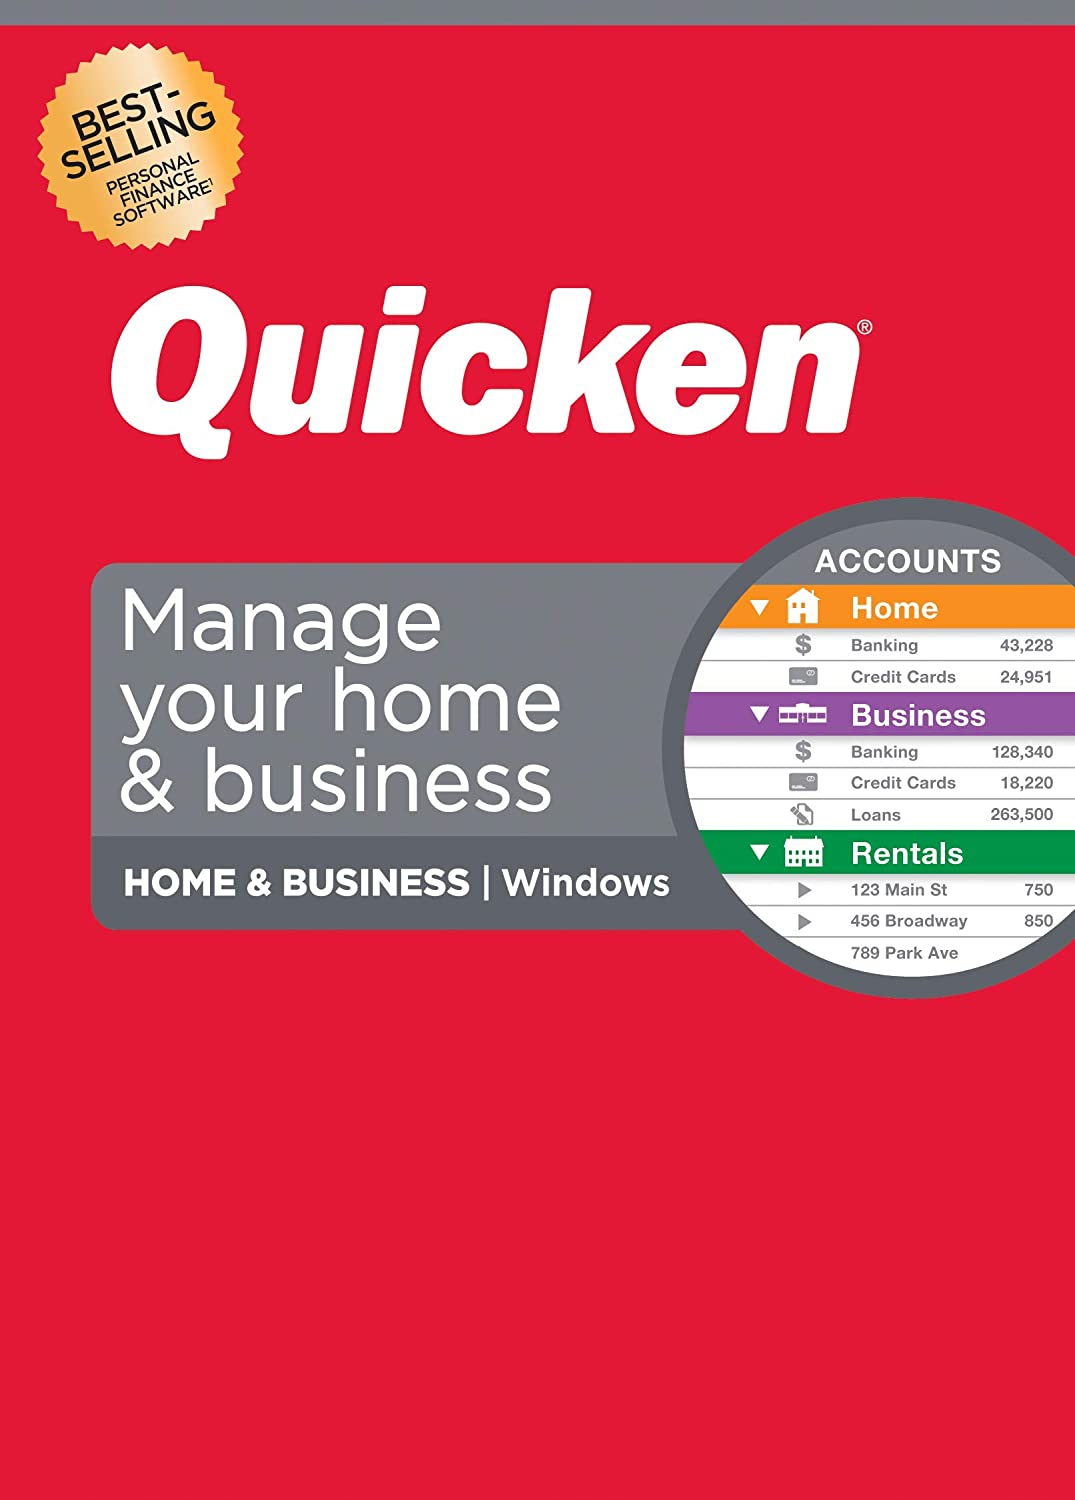 Home Inventory Software